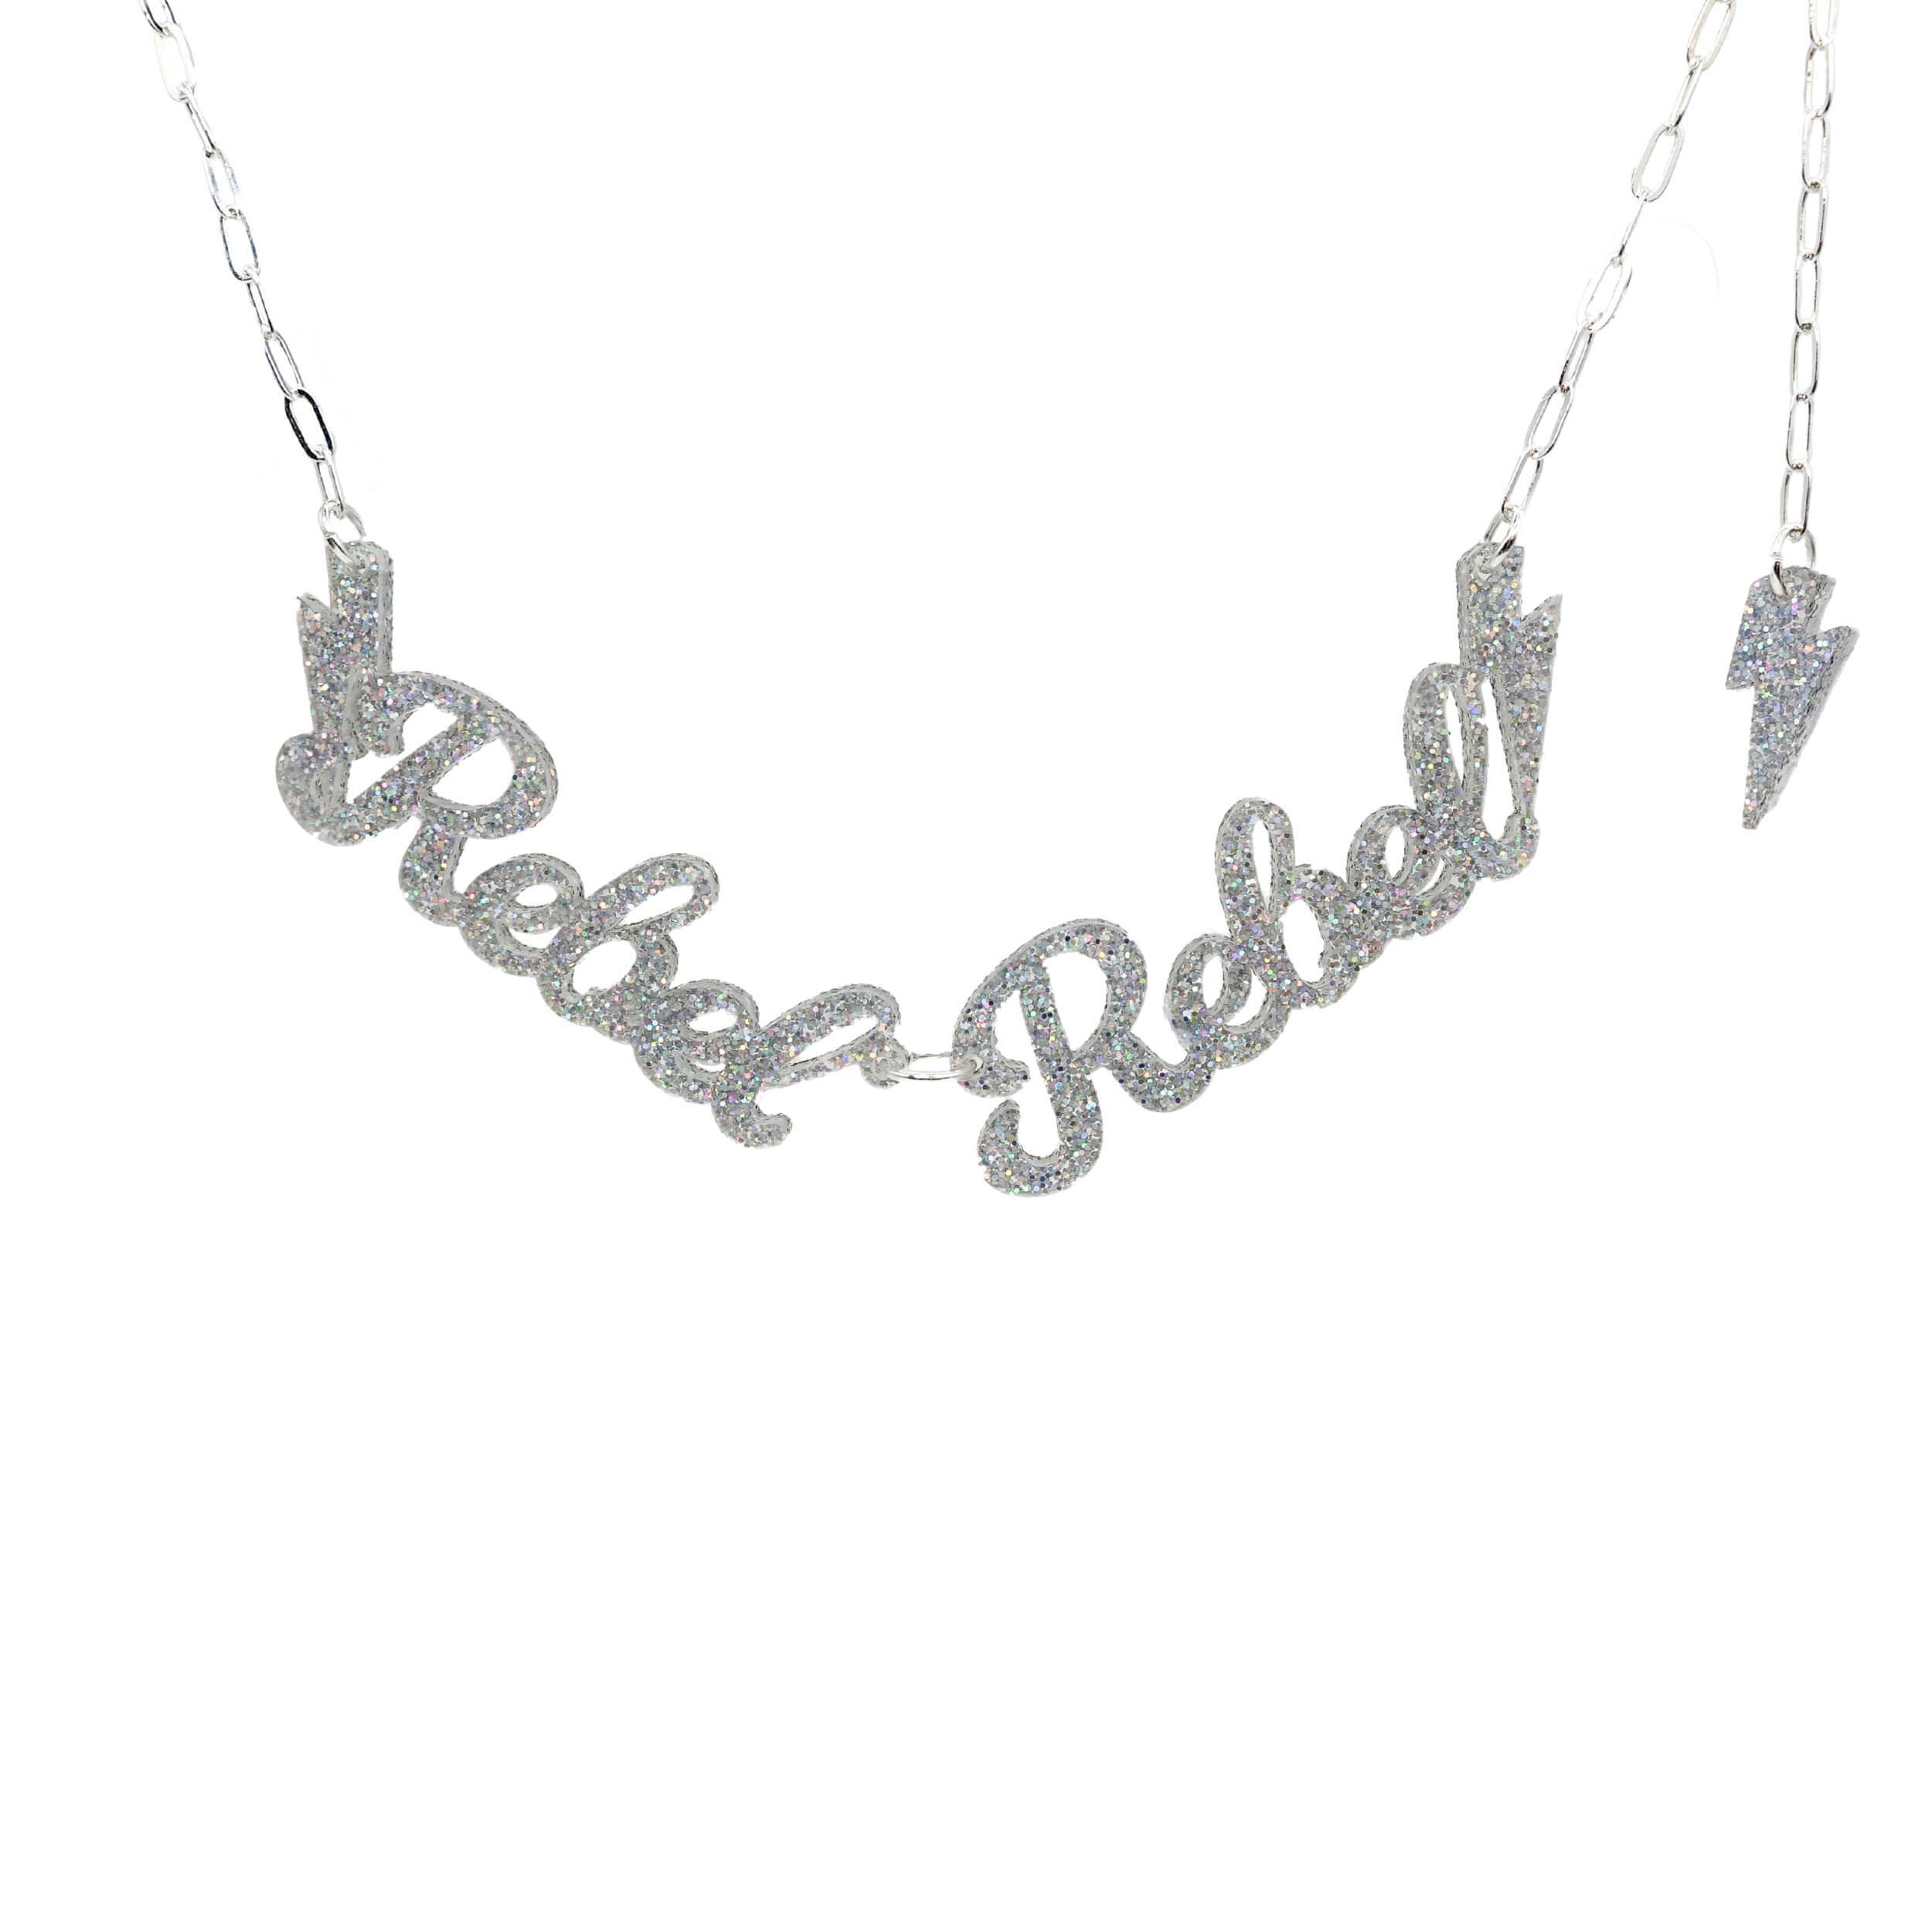 Rebel Rebel necklace in silver glitter shown hanging against a white background. 